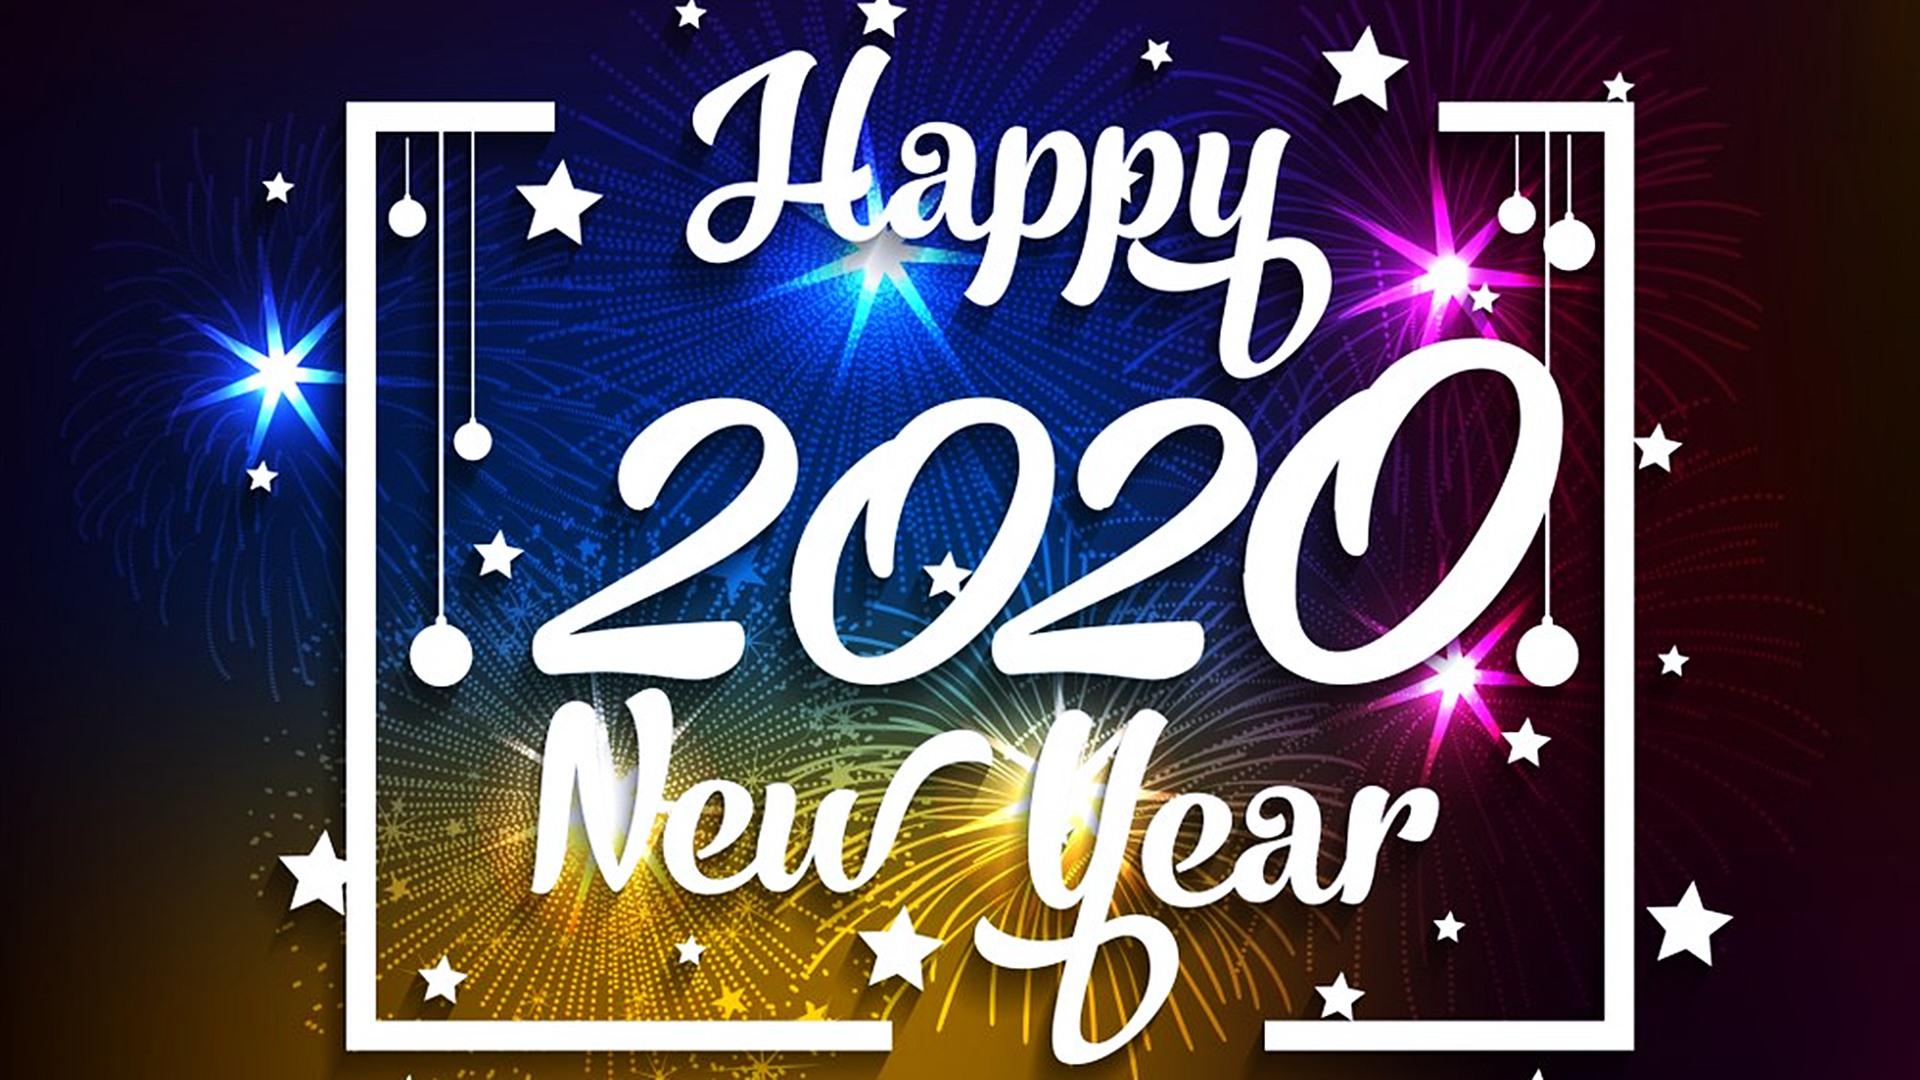 Happy New Year Hd 2020 Wallpapers - Wallpaper Cave